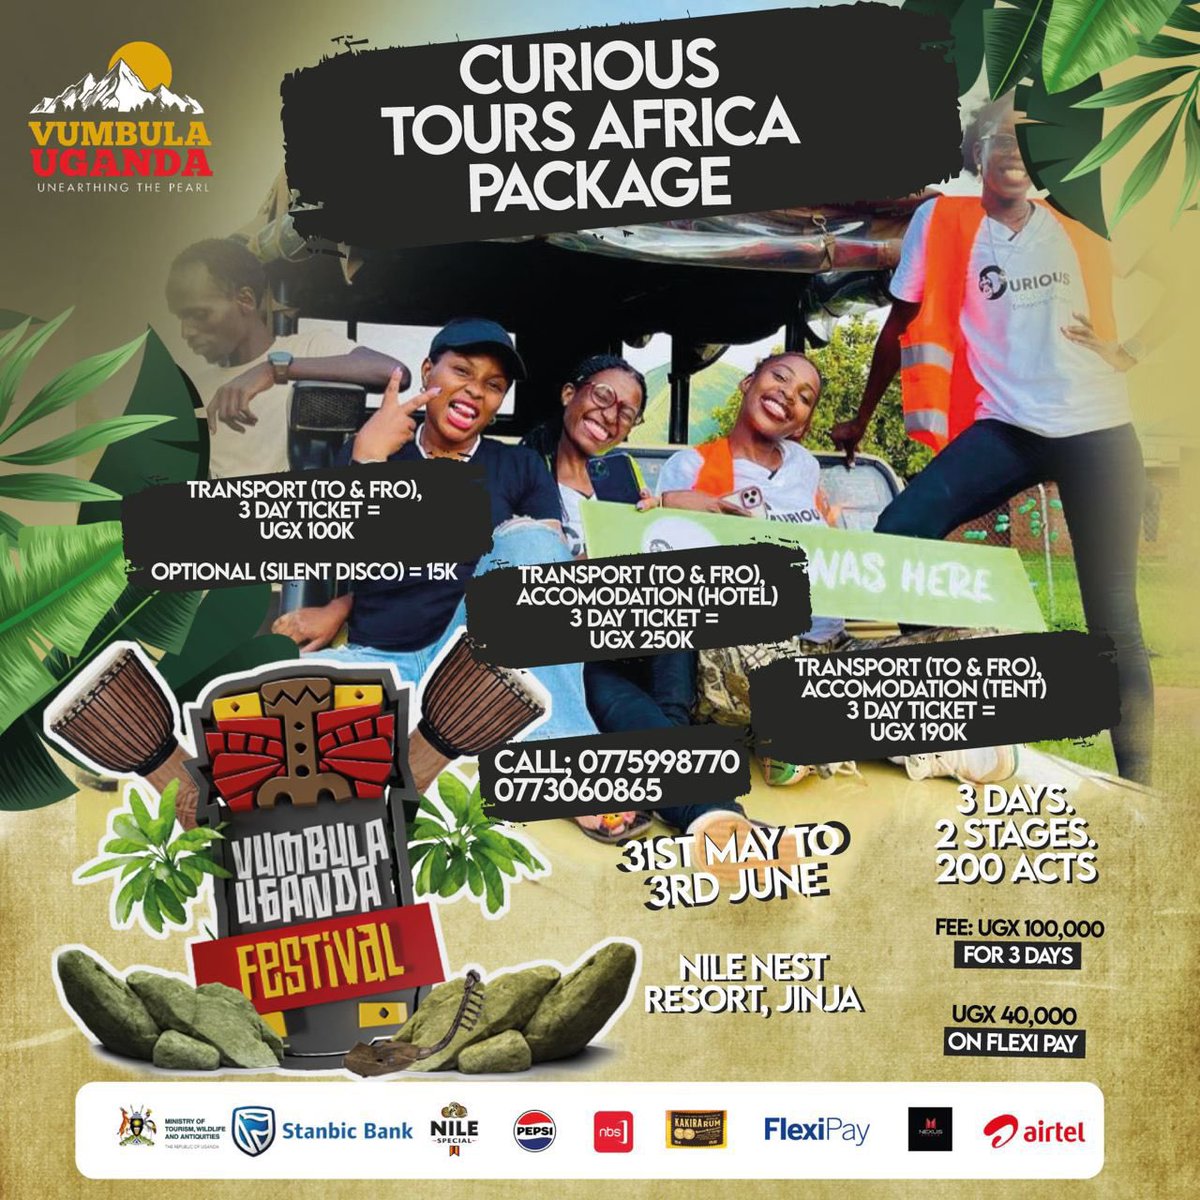 Our tour and travel partners made some affordable packages for you. Reach out to them for the best tourism experiences. #VumbulaUgandaFestival #GreeningTheNile